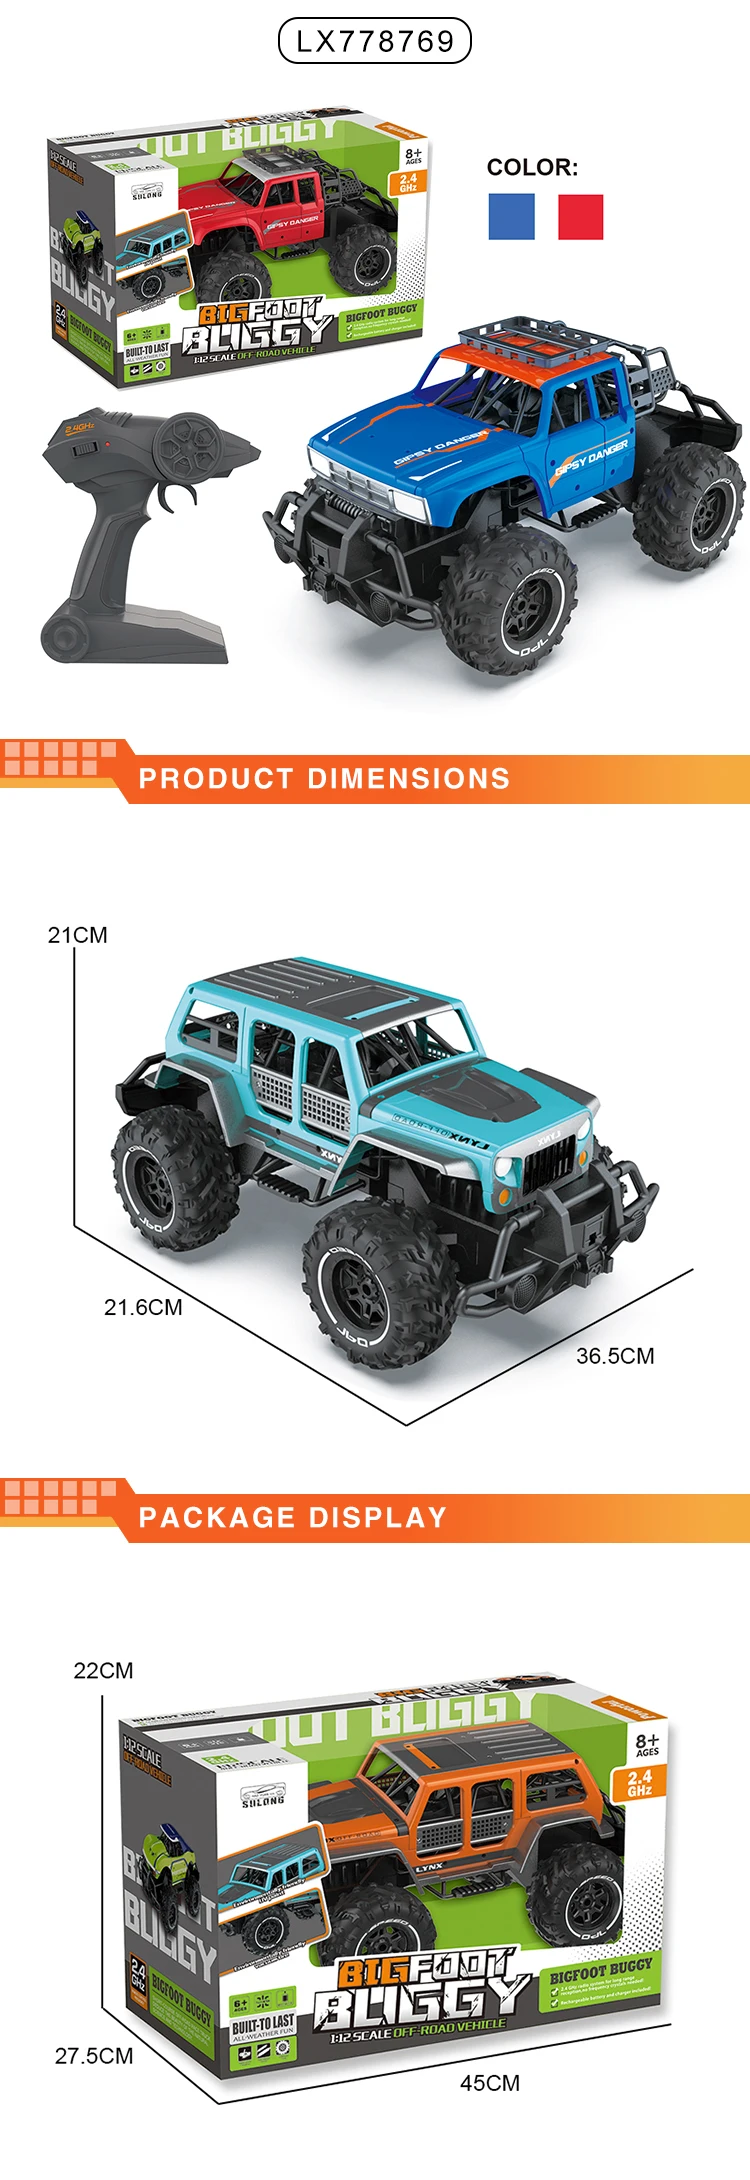 Amazon Hot Sale Climbing Crazy Car Crawler RC Offroad Buggy High Speed Electric Car Toy